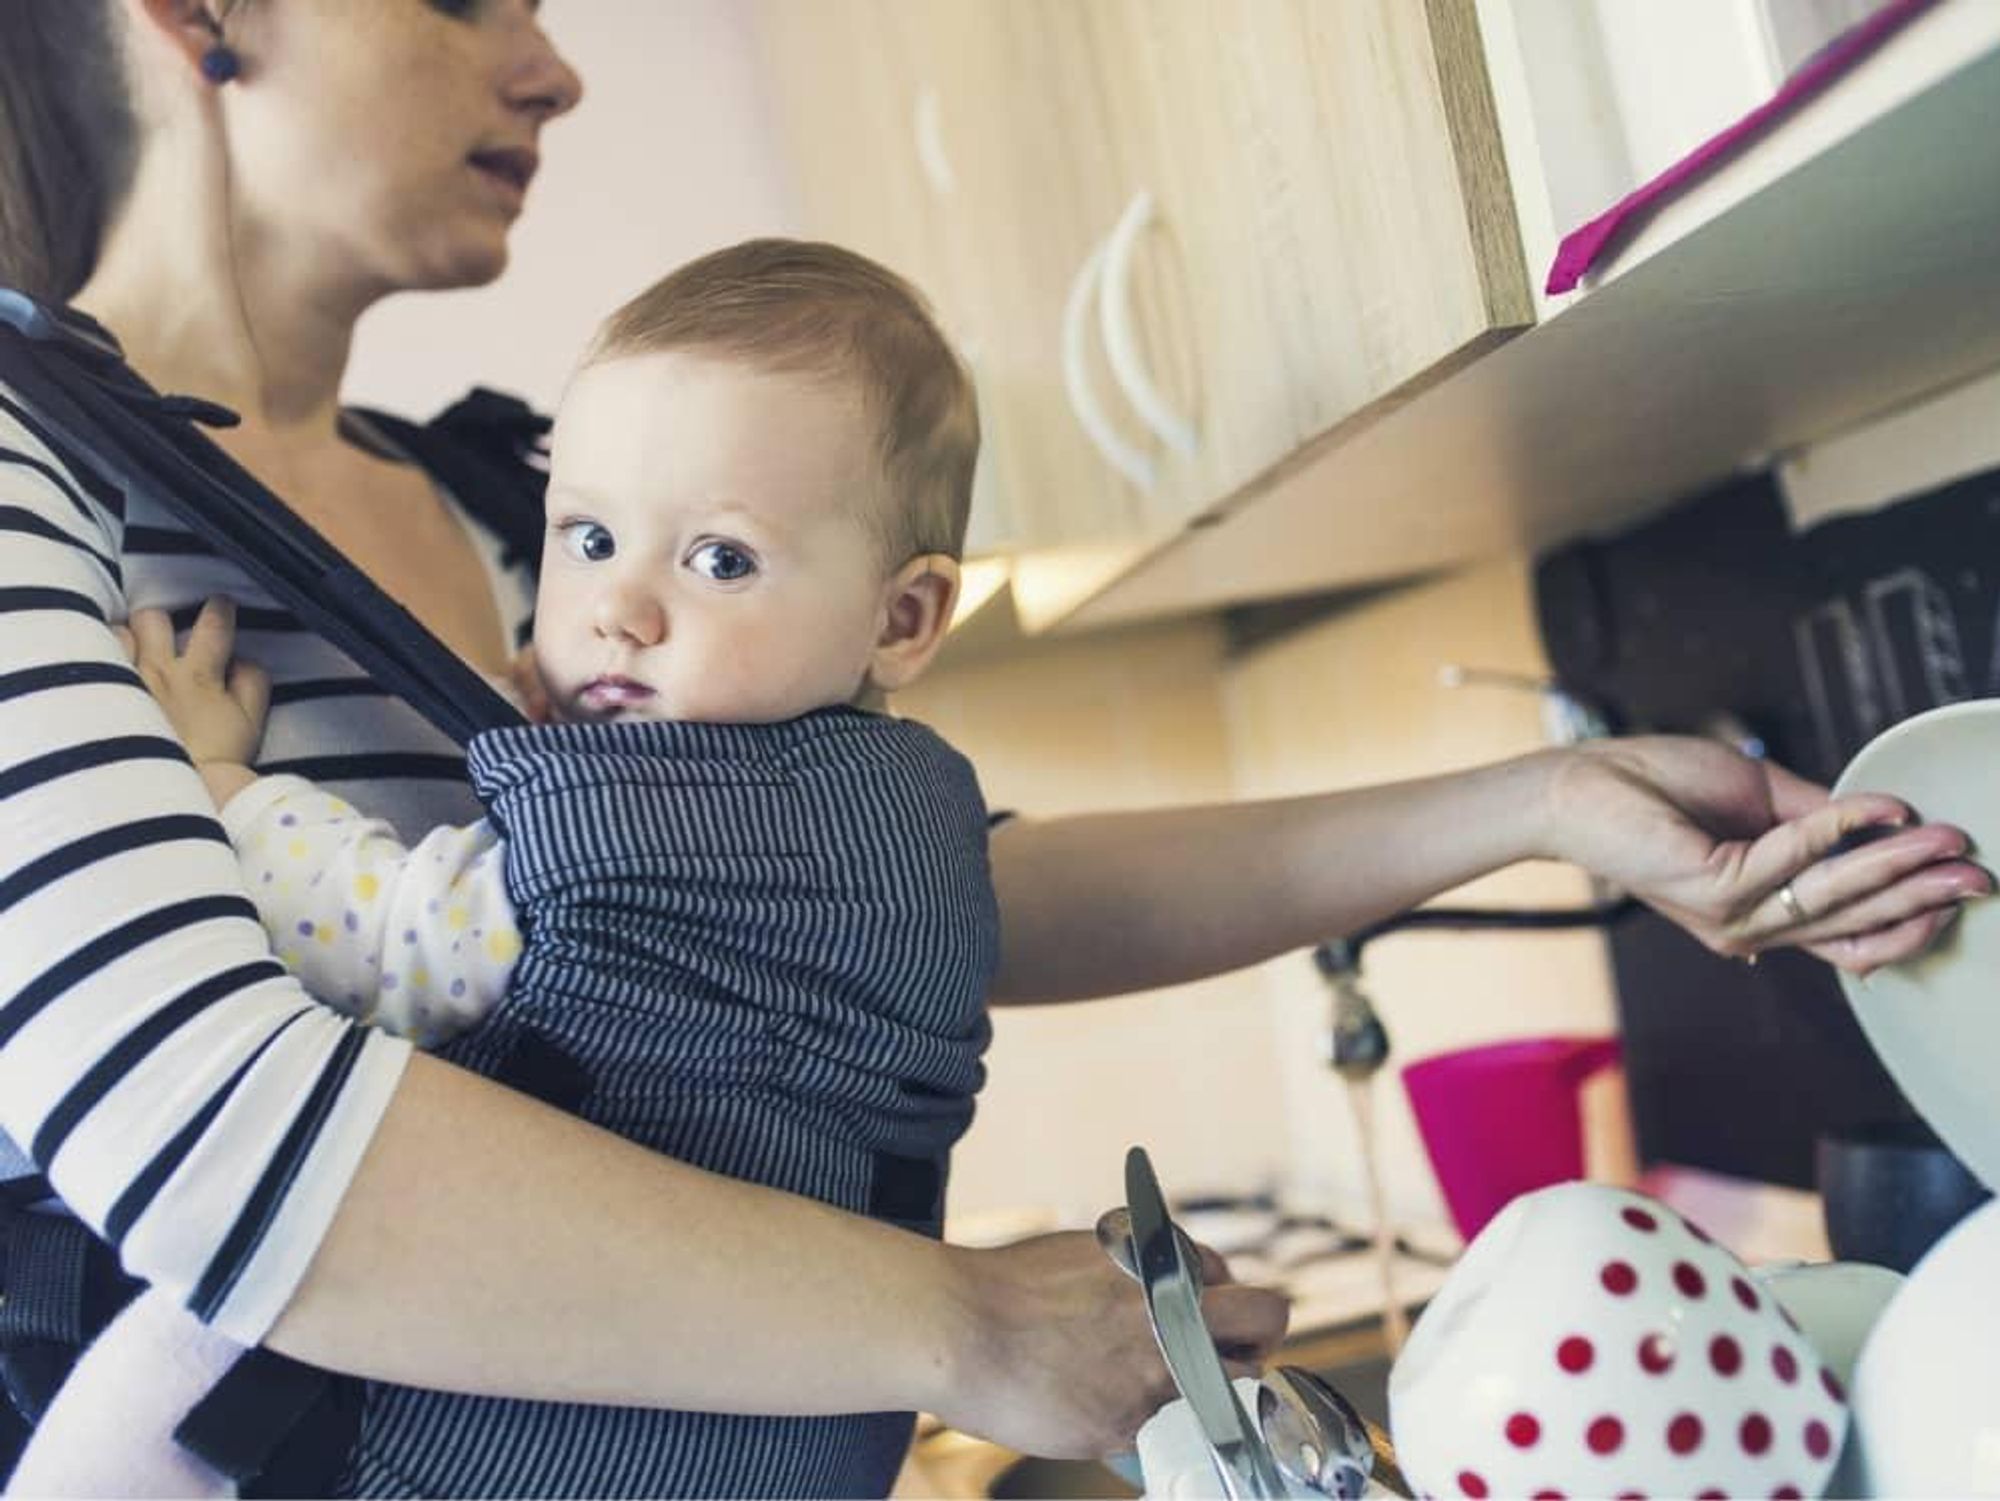 Mom washing dishes while holding her baby